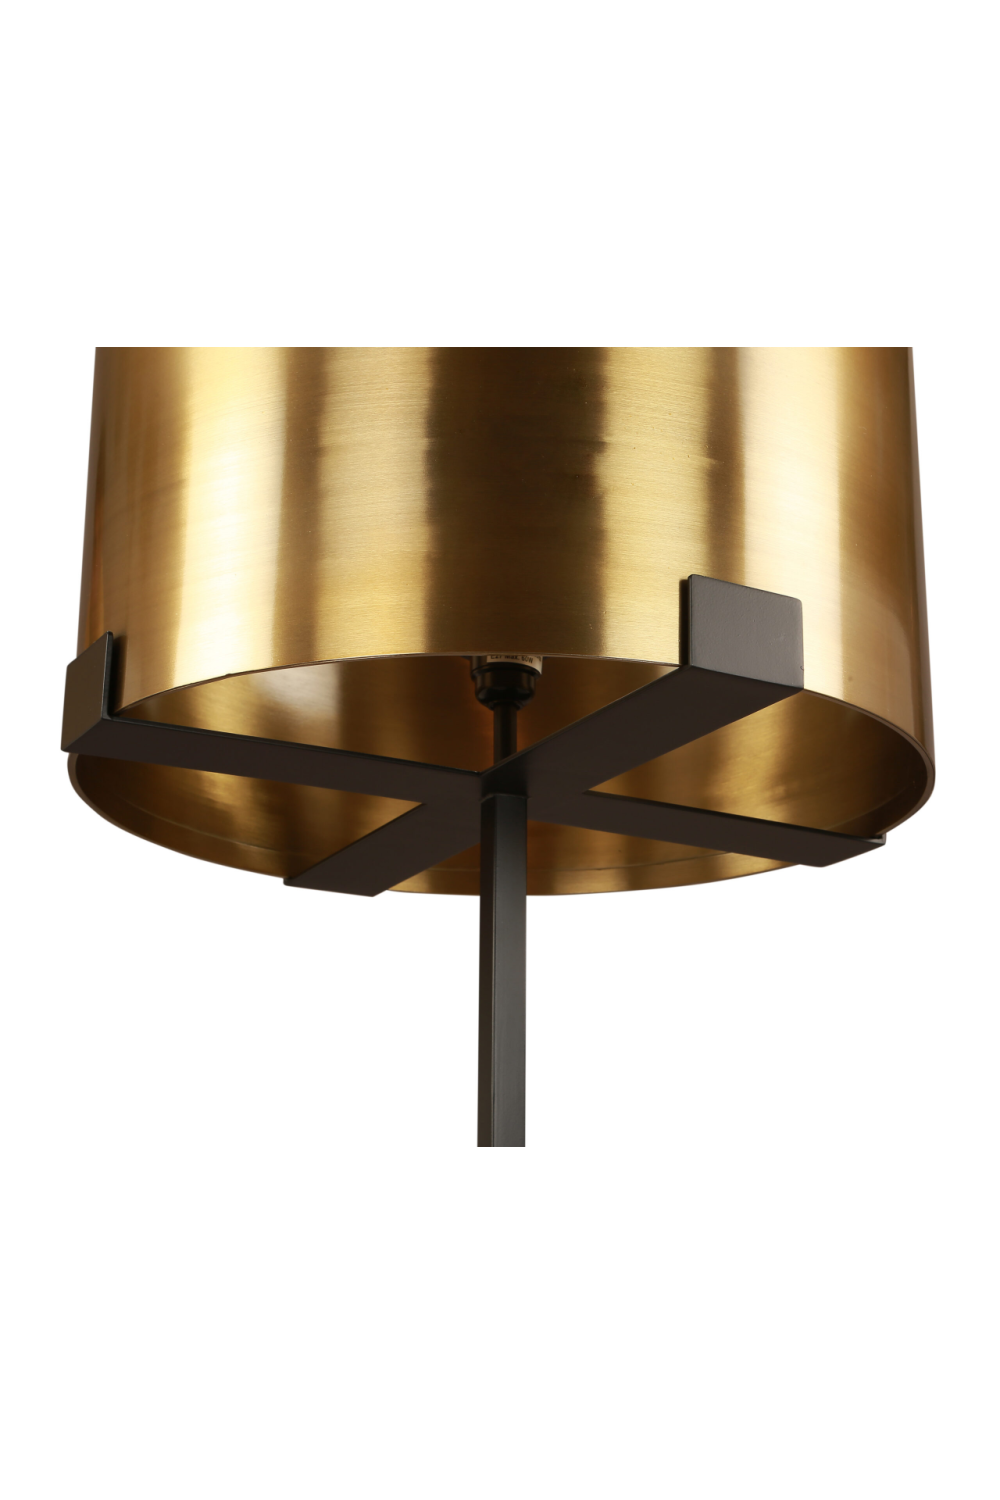 Round Brushed Brass Table Lamp | Liang & Eimil Hamilton | OROA.com